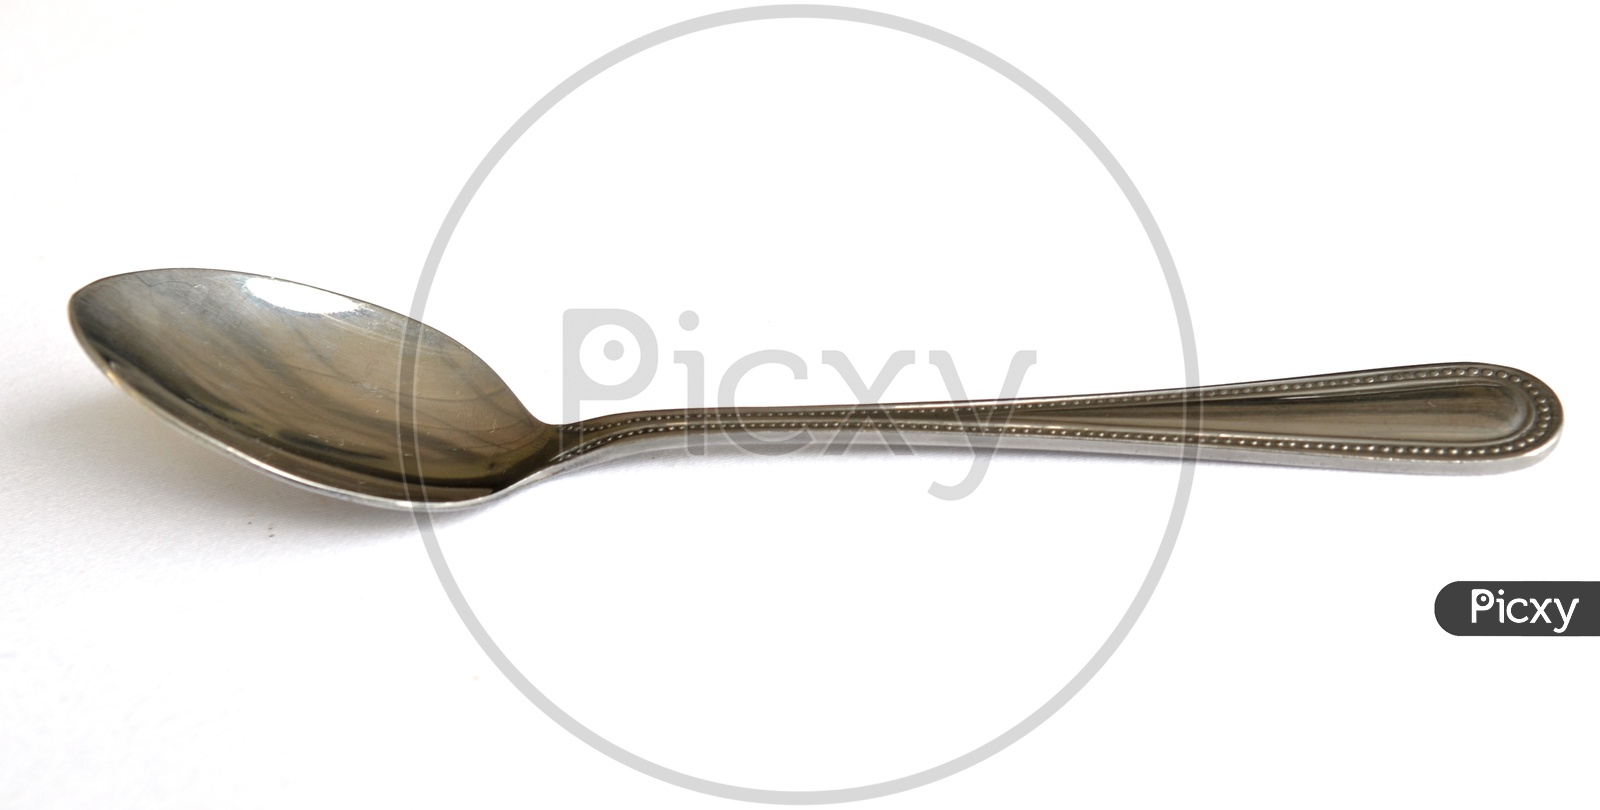 A Stainless Steel Spoon